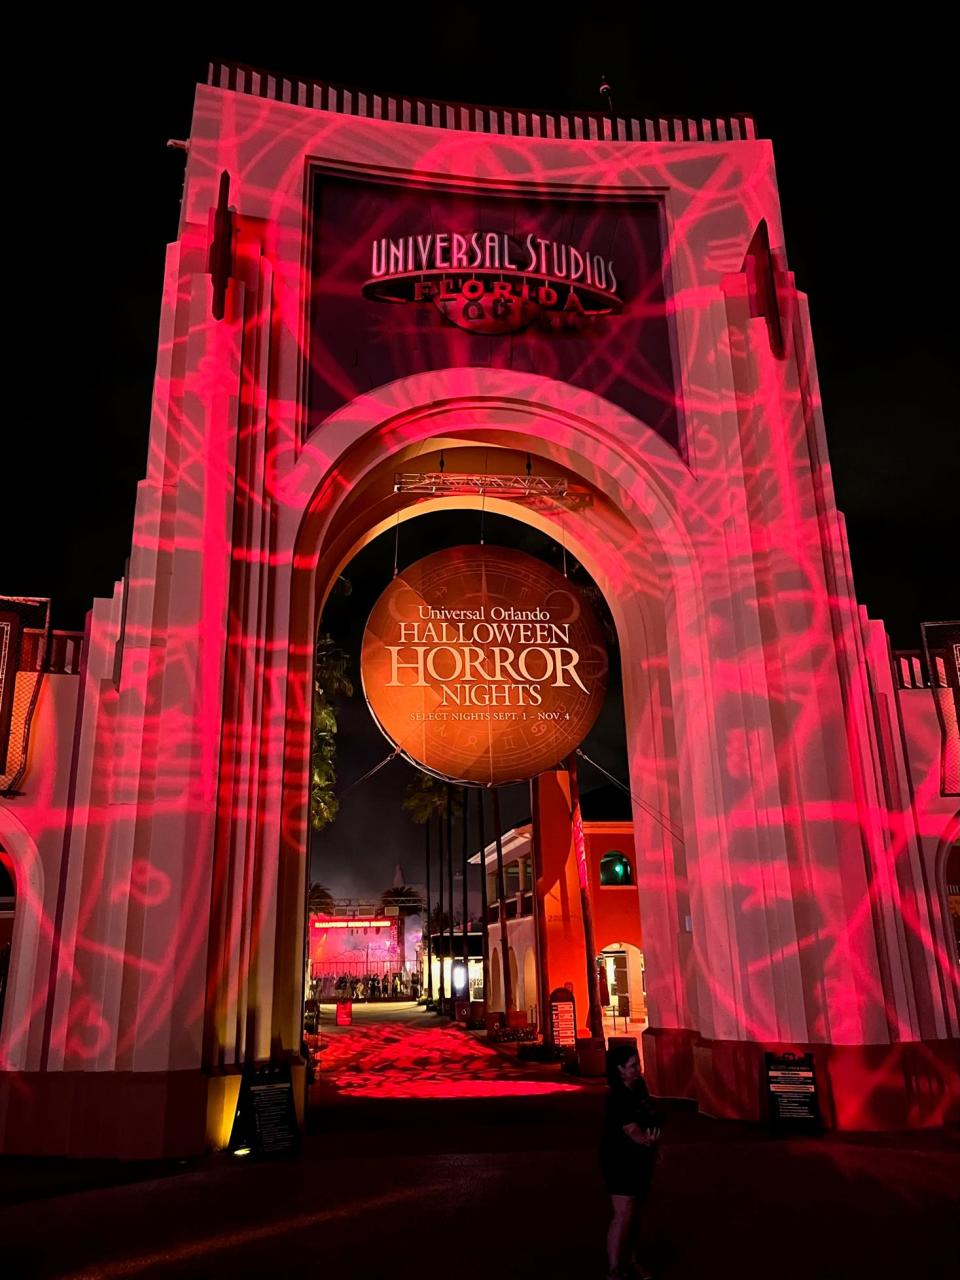 The Halloween Horror Nights sign is cast in an eerie red light at the end of HHN's opening night at Universal Orlando.